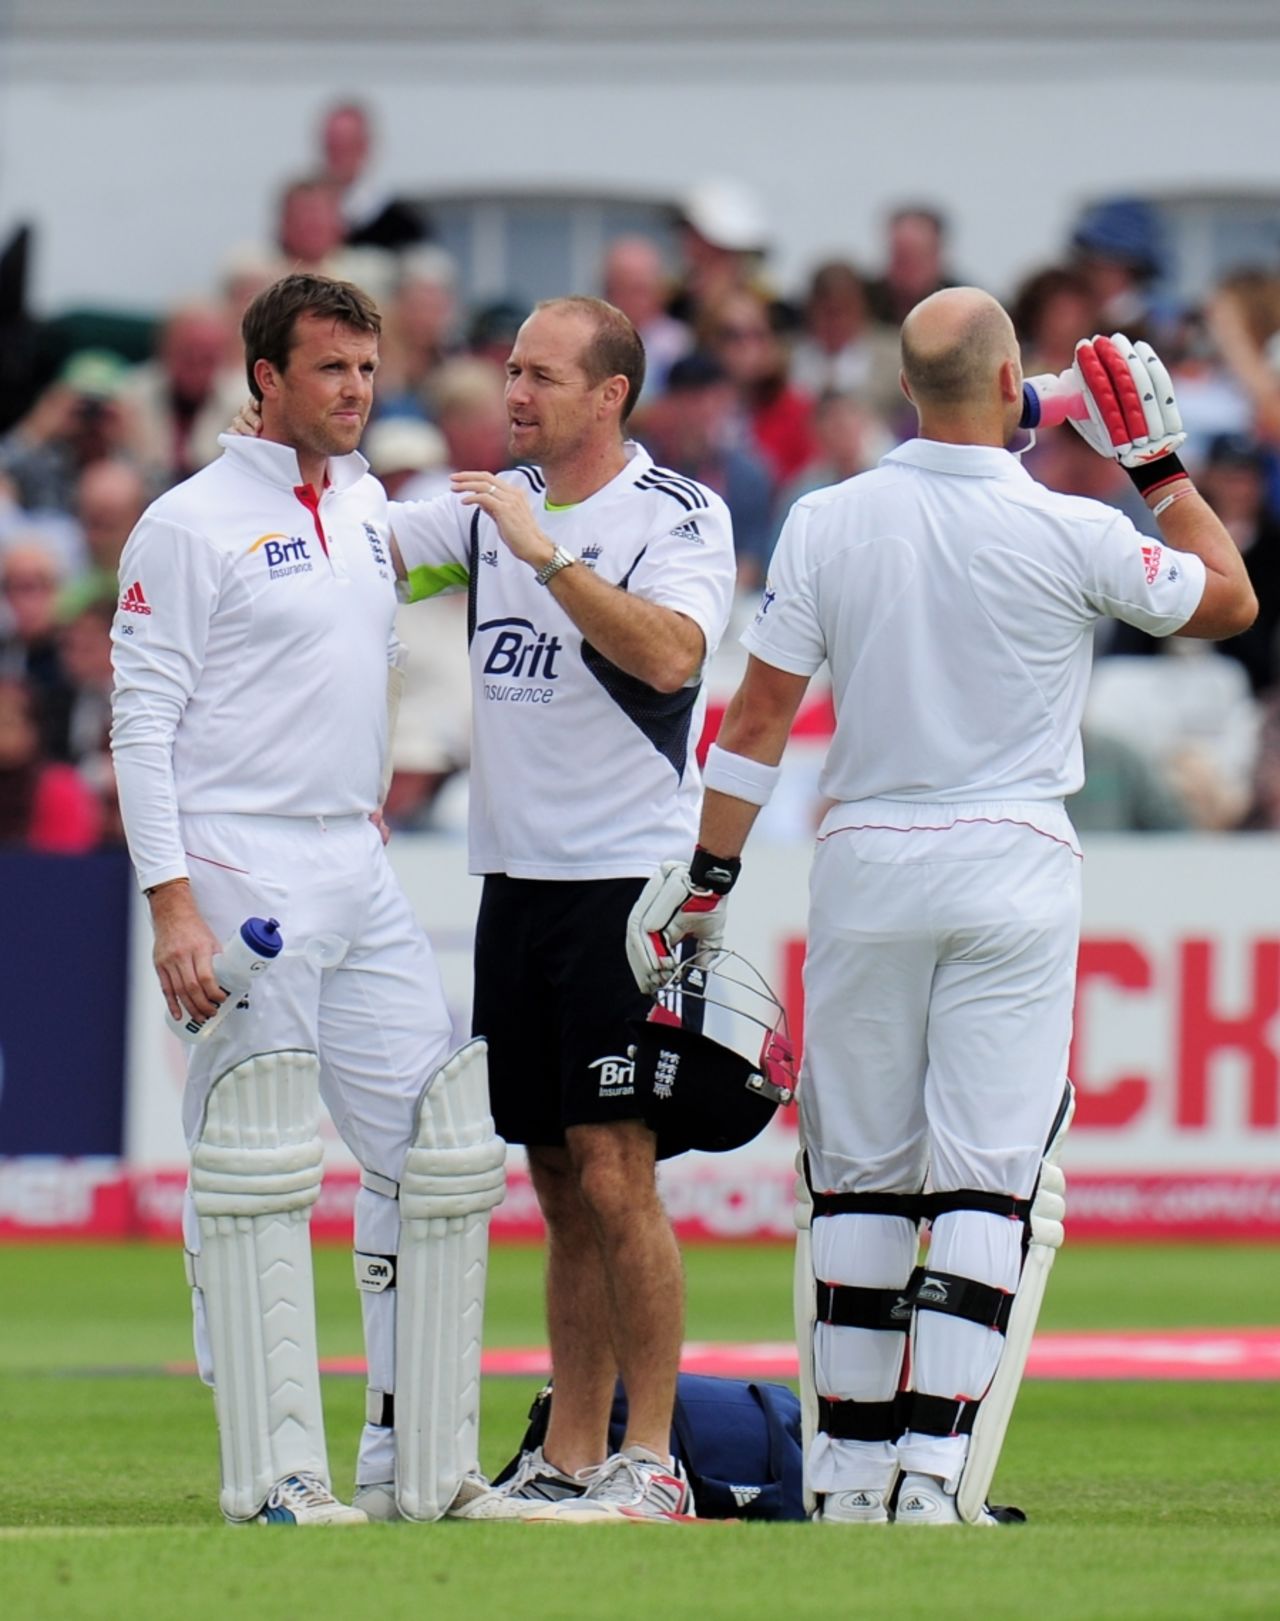 Graeme Swann receives some attention from the England physio after he was struck on the back of the helmet by a bouncer from Umar Gul, England v Pakistan, 1st Test, Trent Bridge, 3rd day, July 31, 2010